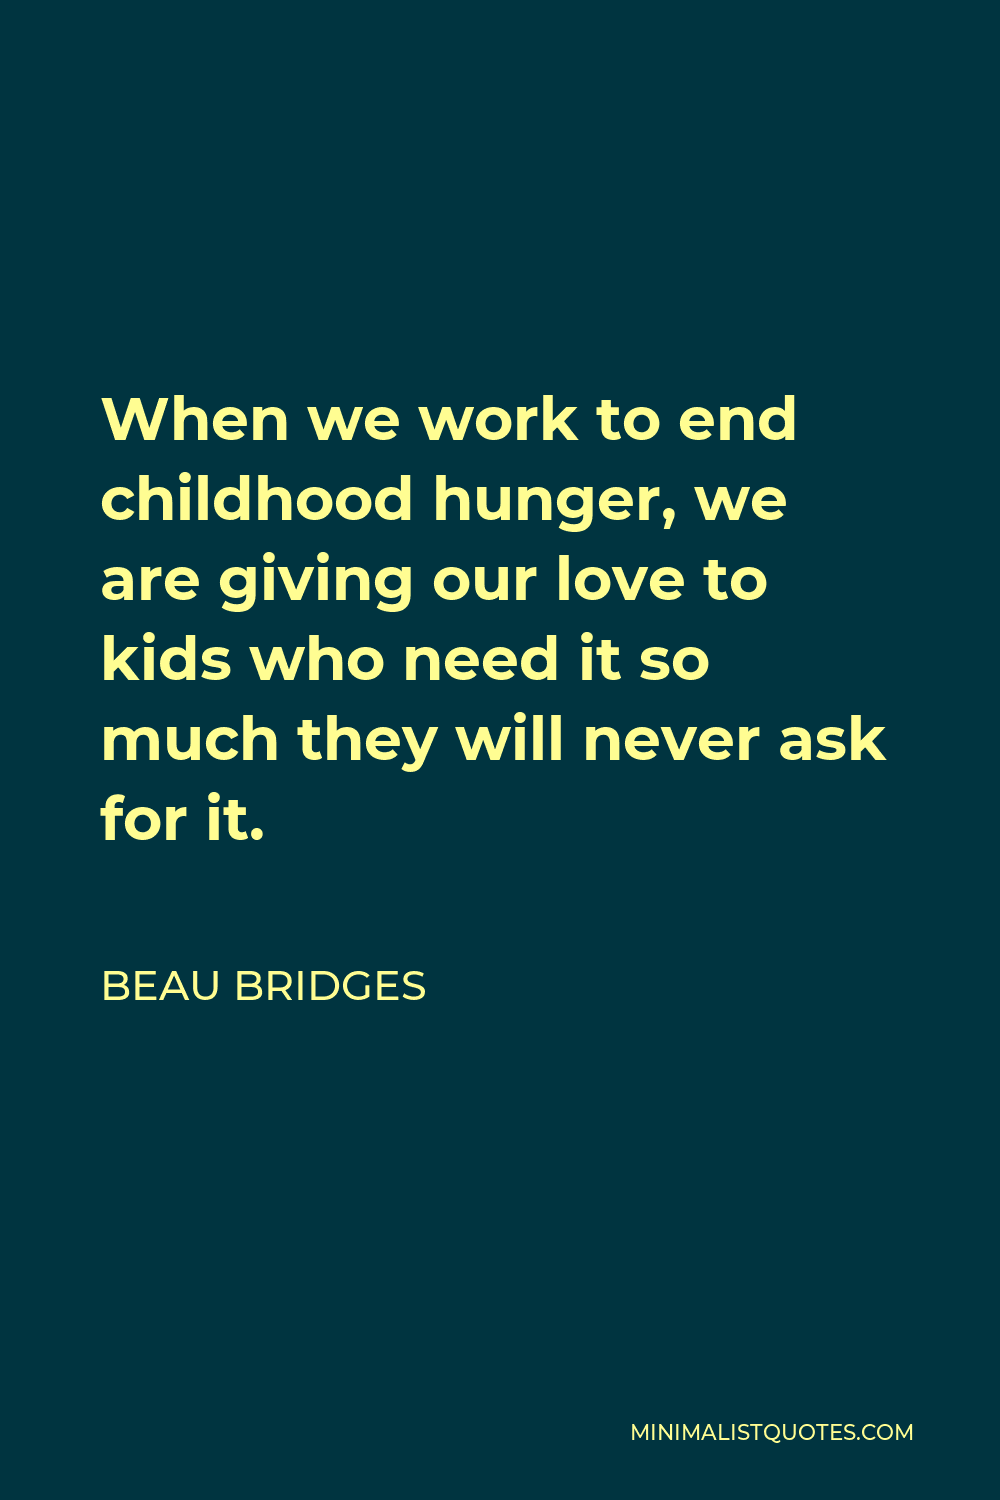 Beau Bridges Quote - When we work to end childhood hunger, we are giving our love to kids who need it so much they will never ask for it.